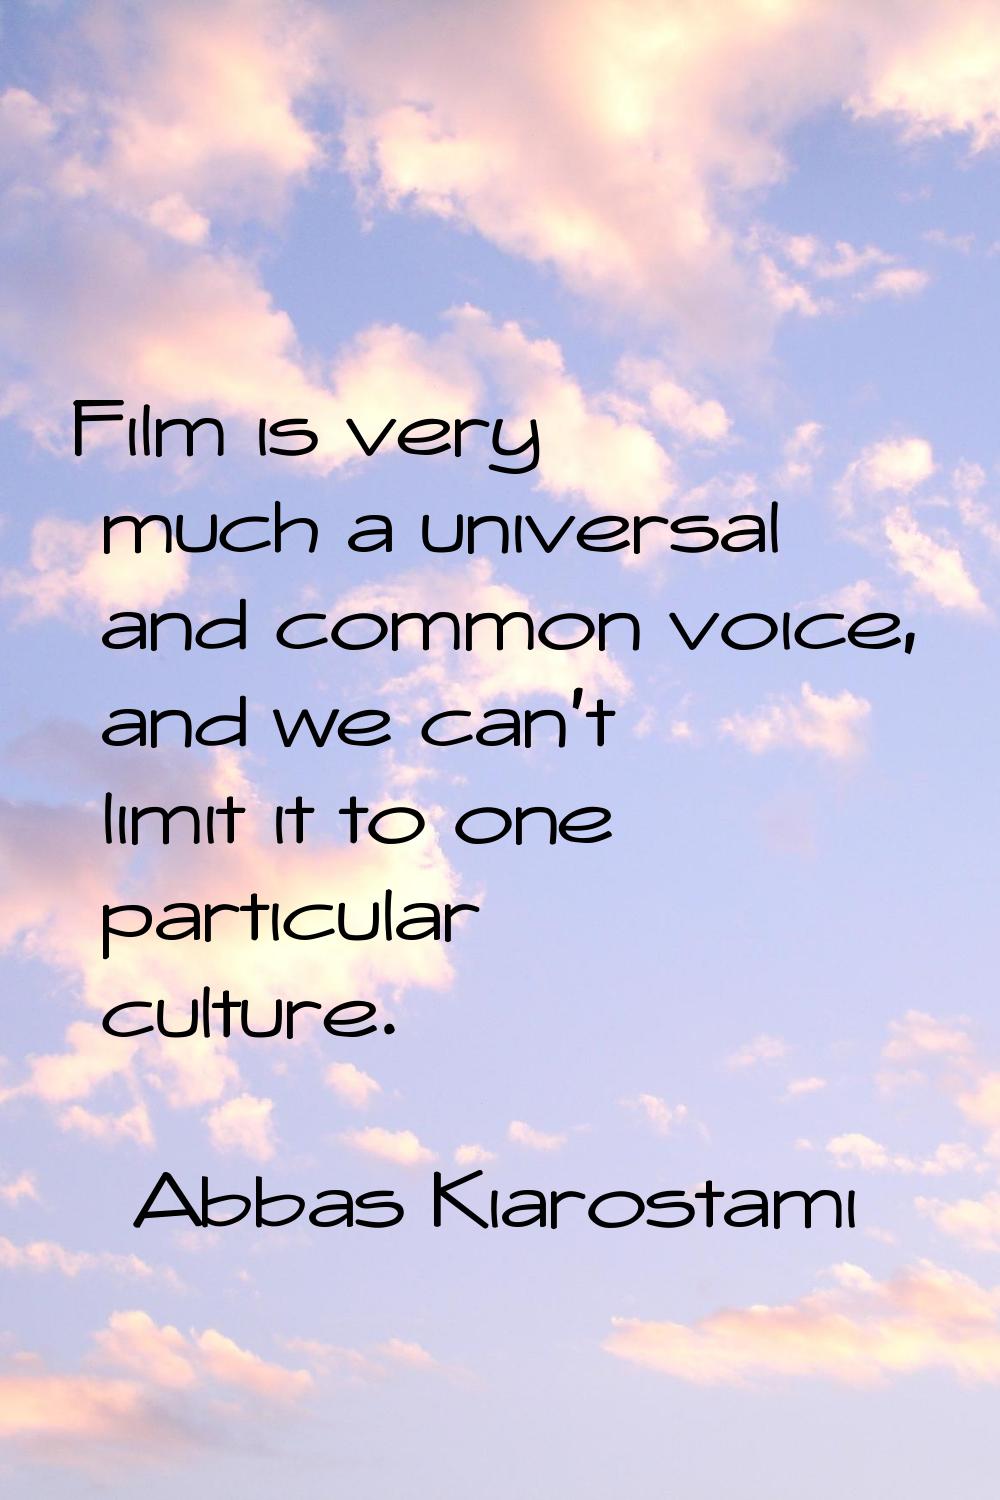 Film is very much a universal and common voice, and we can't limit it to one particular culture.